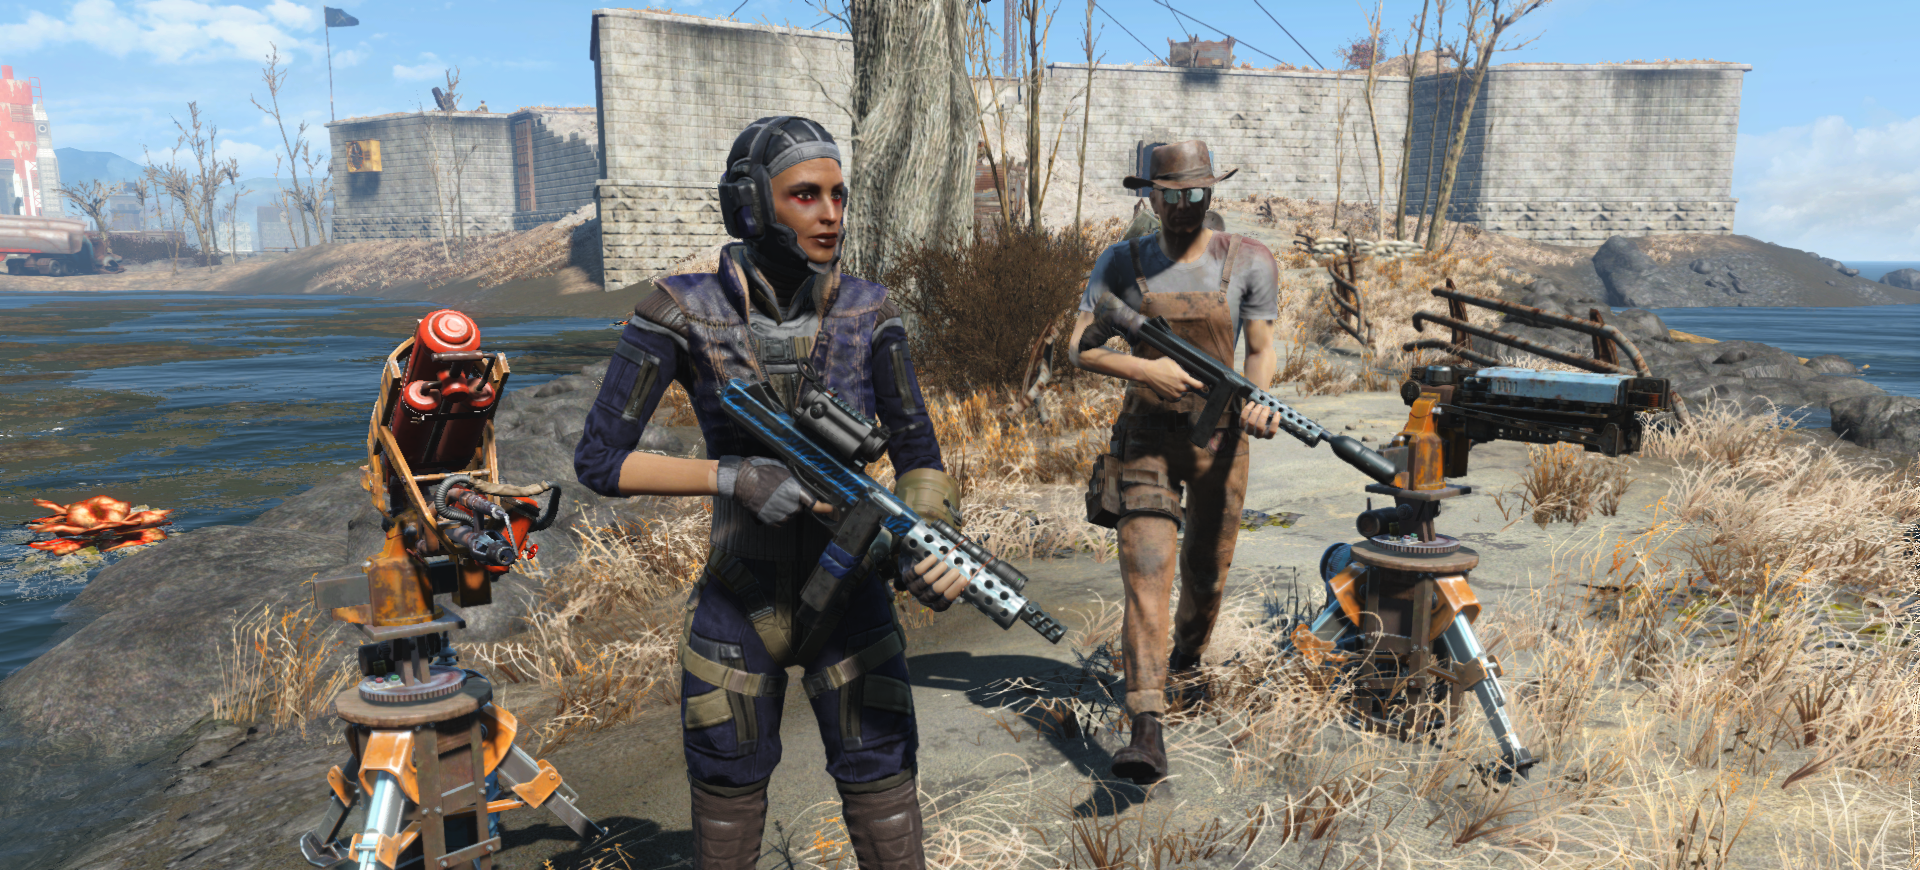 modded fallout 4